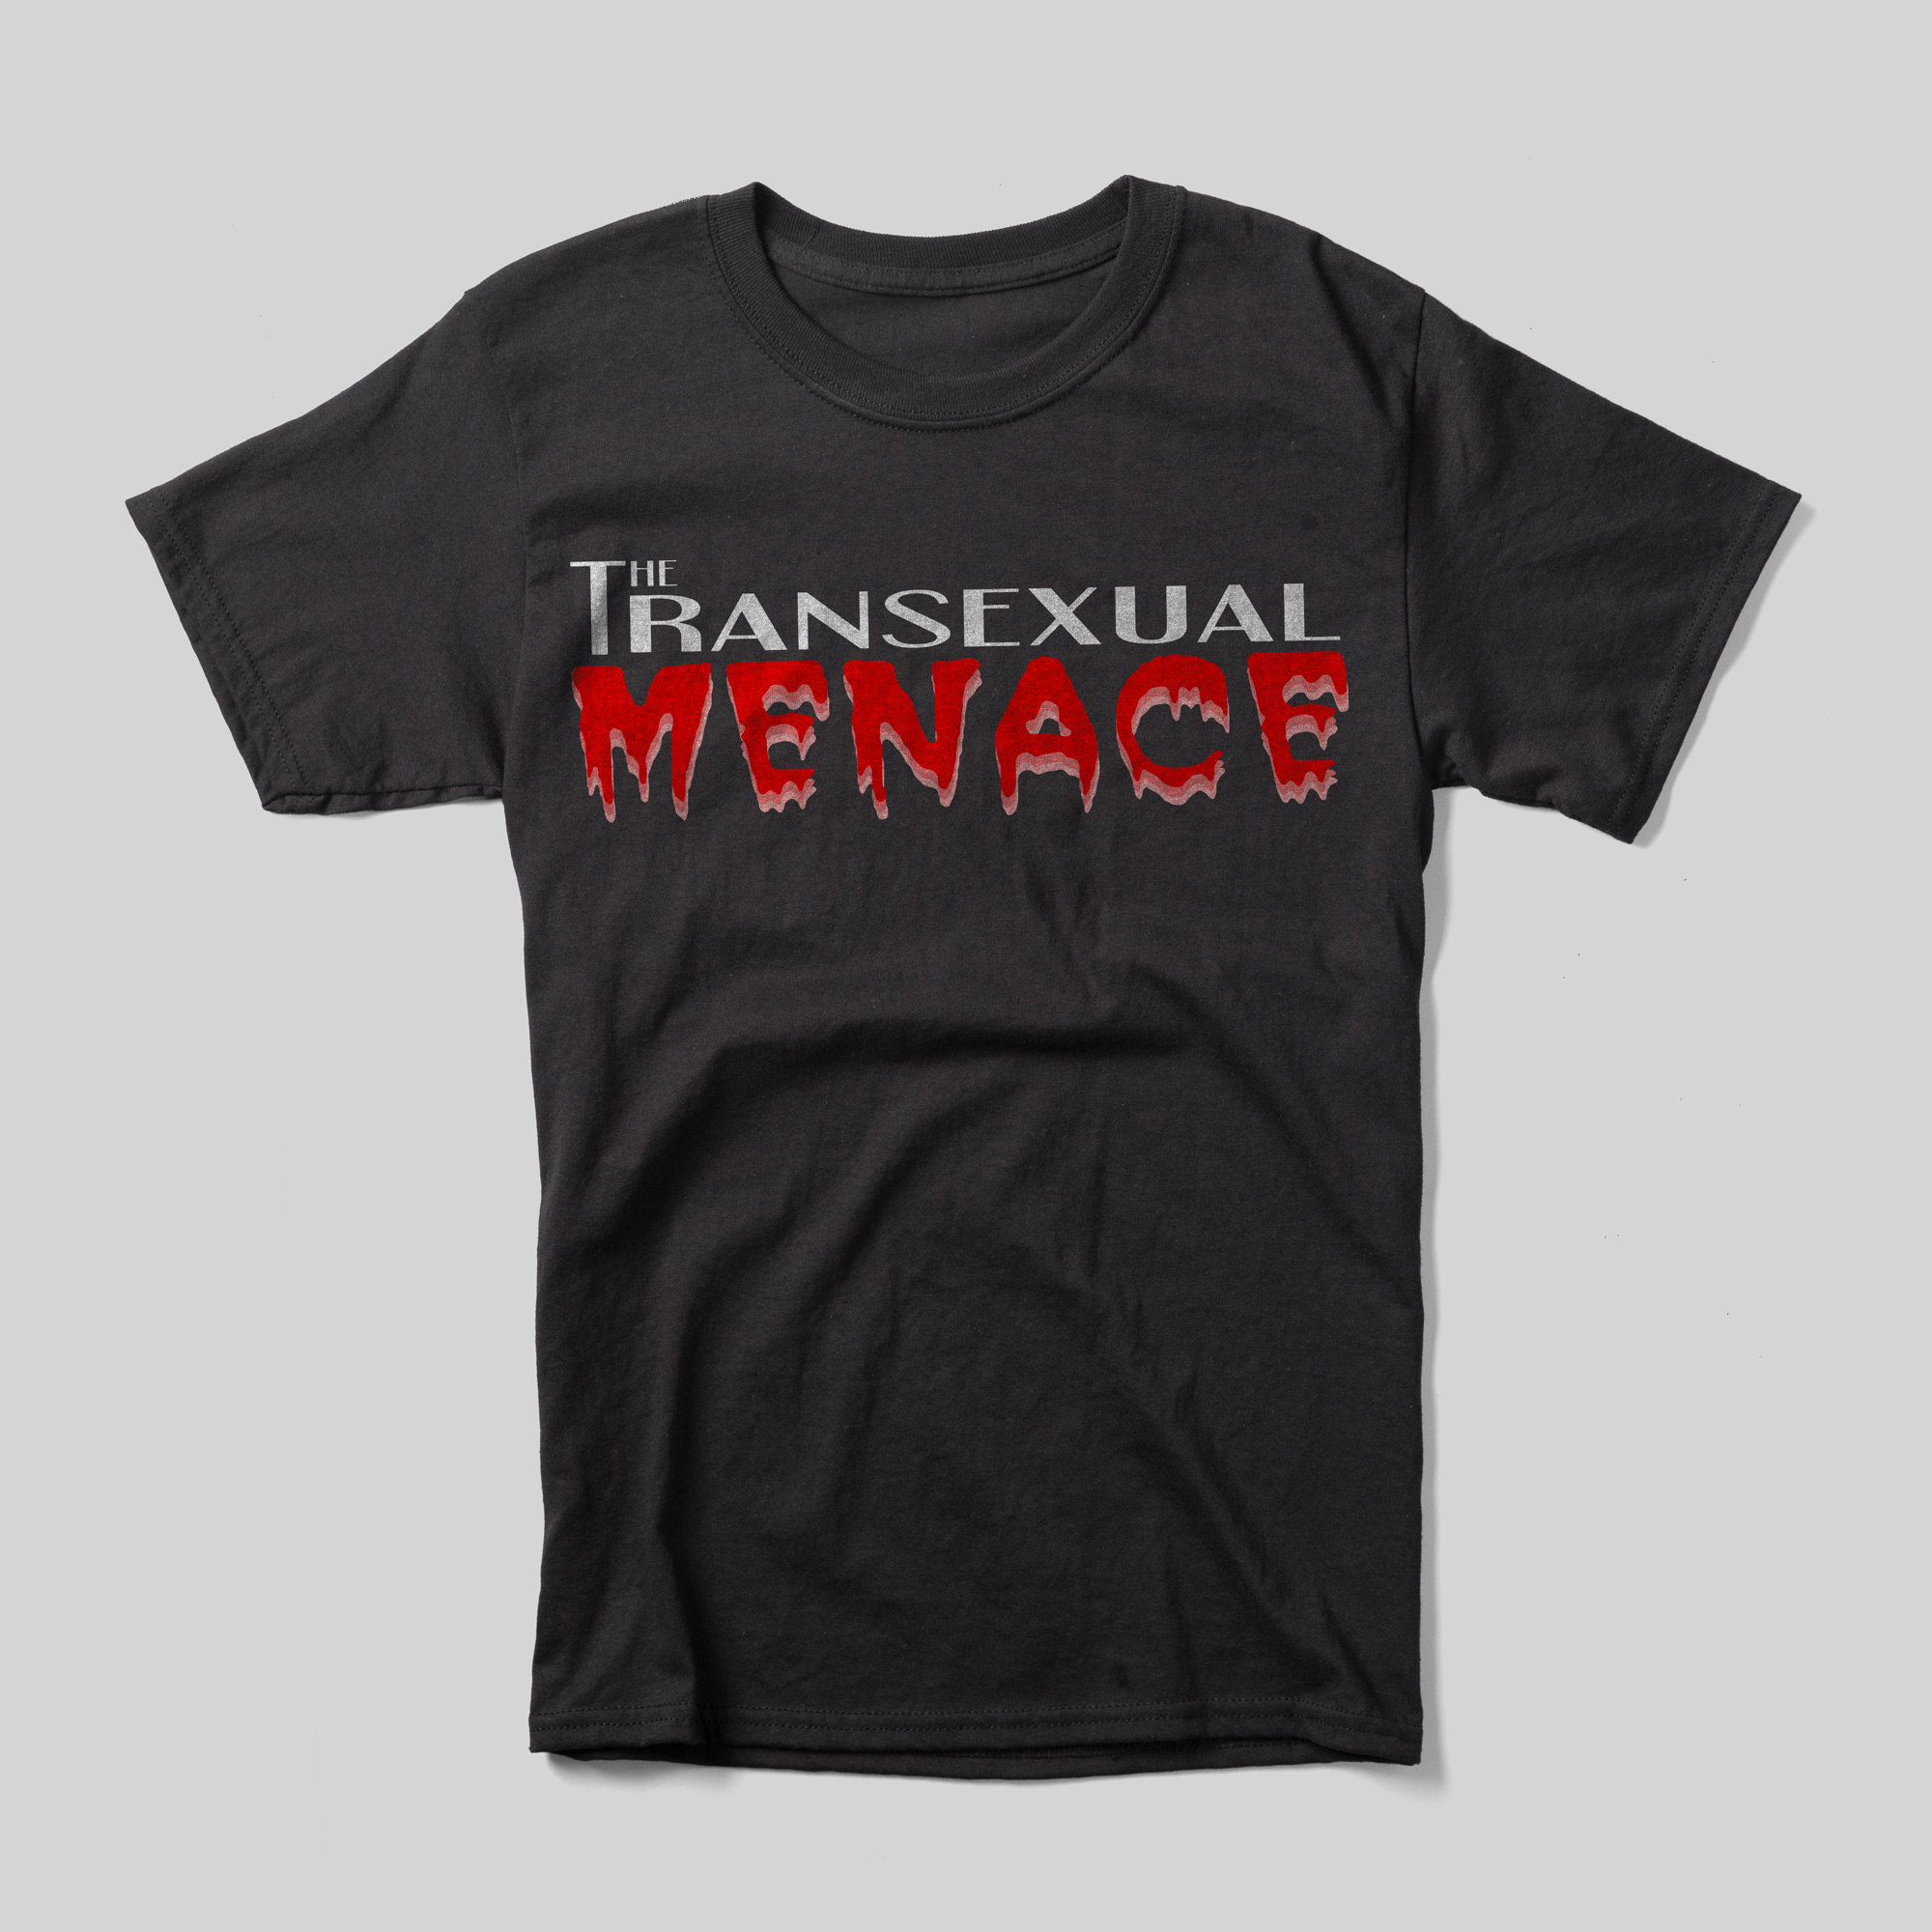 A black t-shirt that reads "The Transexual Menace." "The Transexual" is written in a gray all-caps font, while "Menace" is in "Double Feature" font, like it's written in blood. It is meant to resemble the title of "Rocky Horror Picture Show."